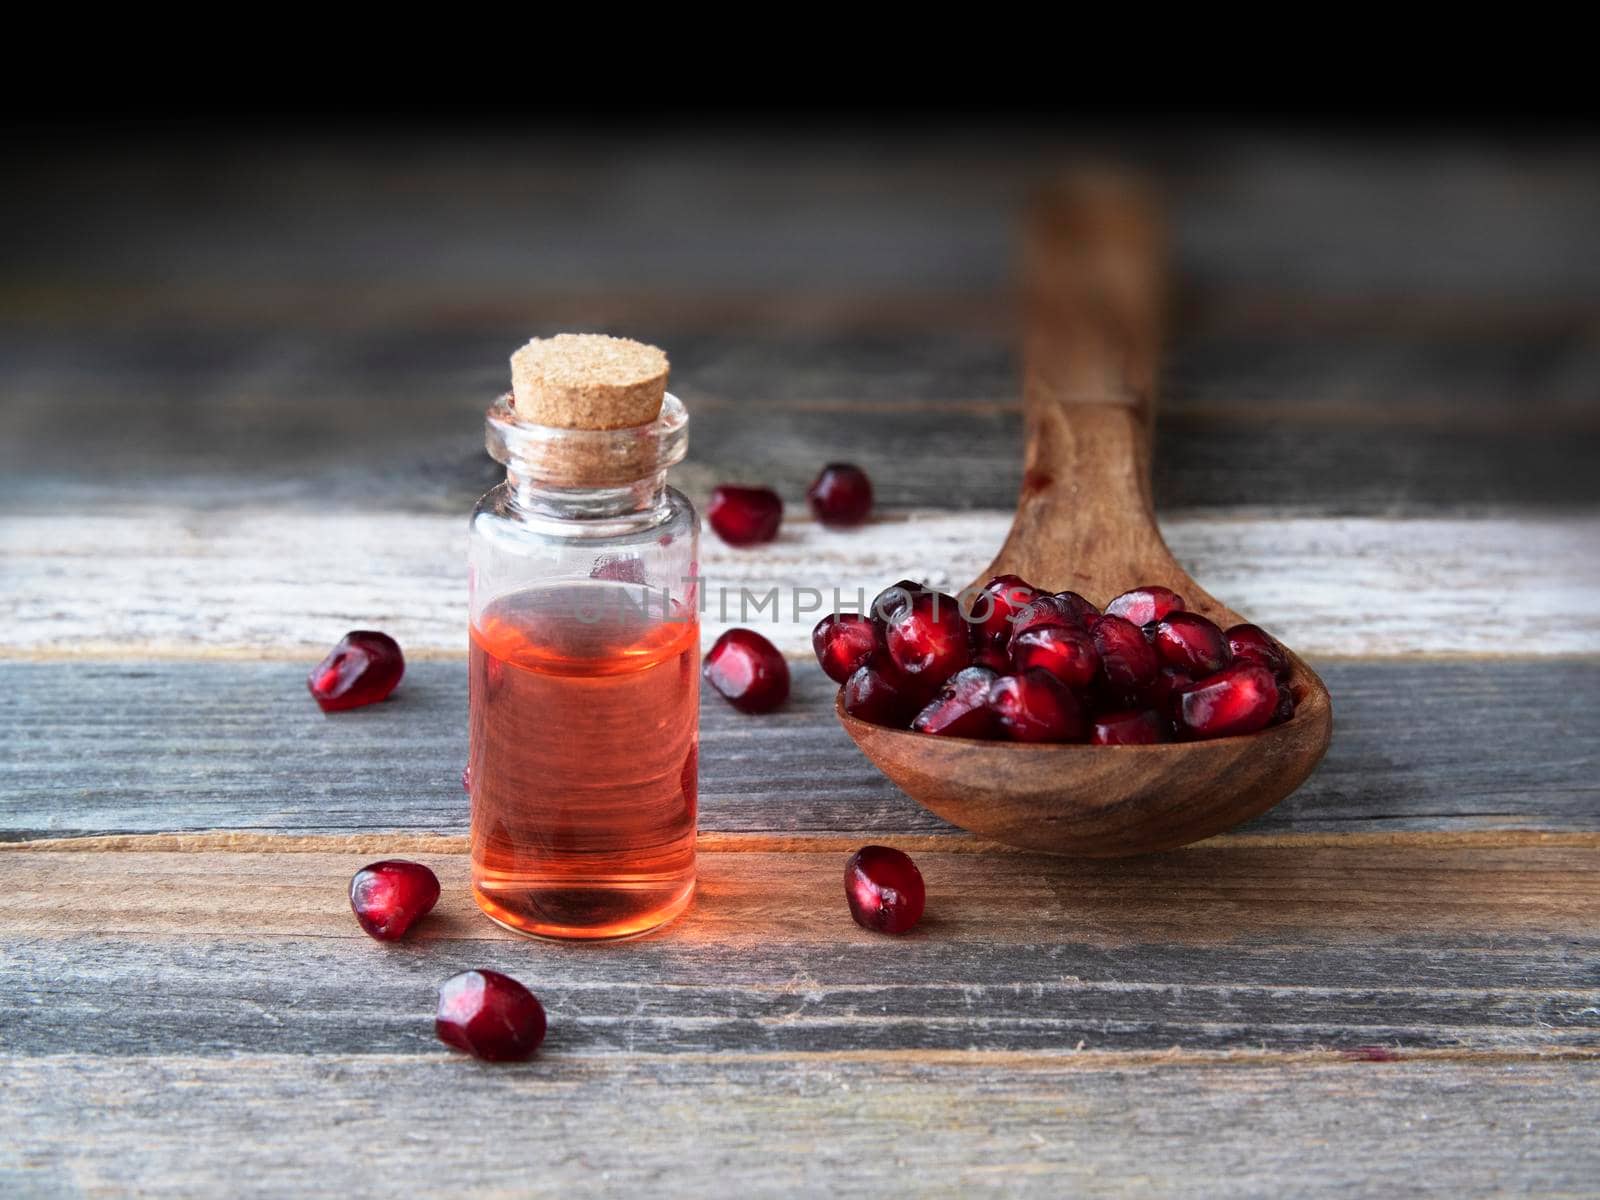 Pomegranate Extract and Seeds by charlotteLake